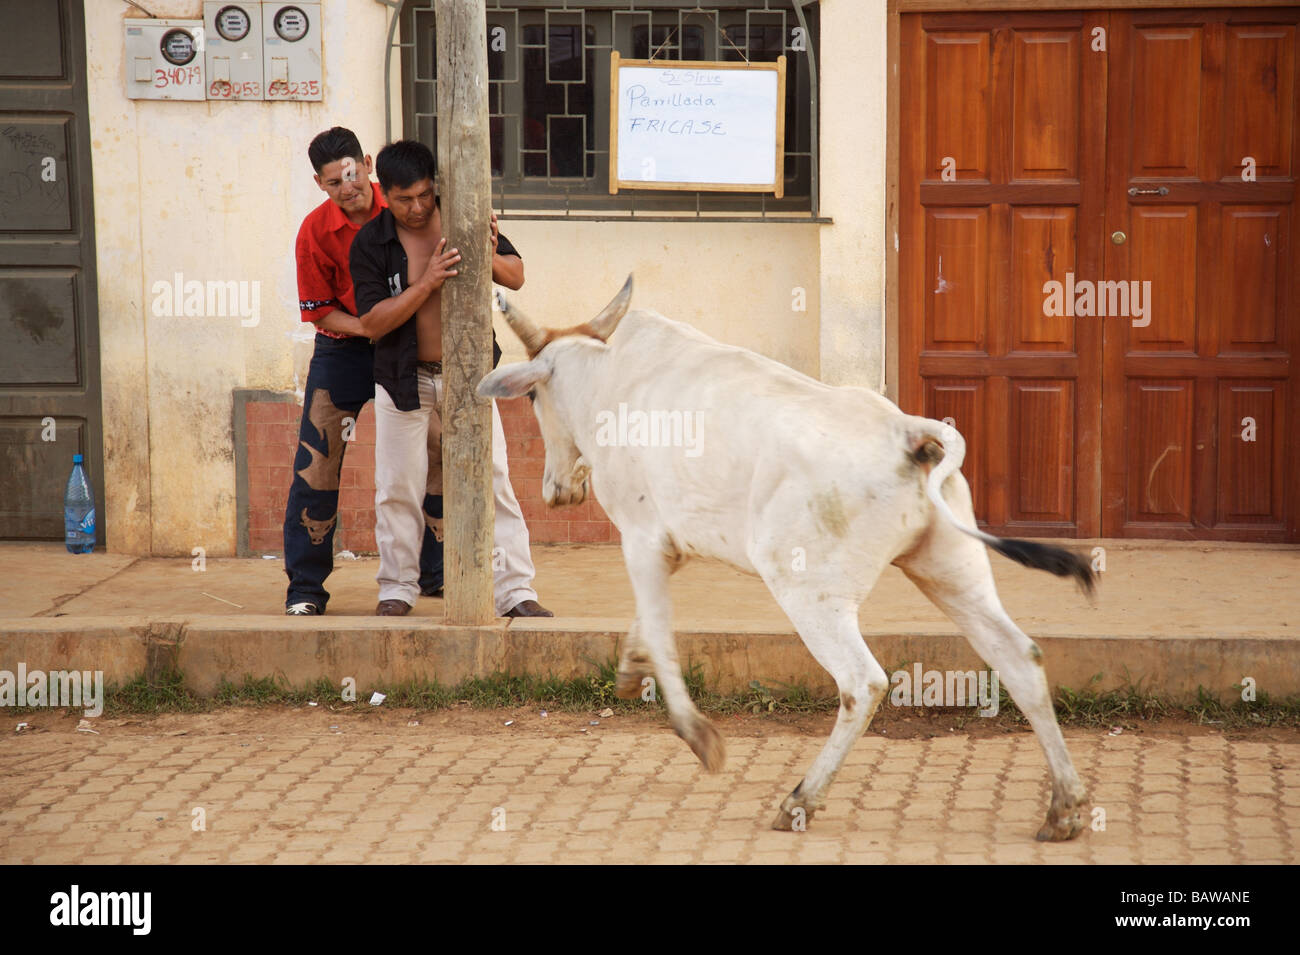 Men hide behind a post after taunting an angry white bull in Apolo, Bolivia Stock Photo